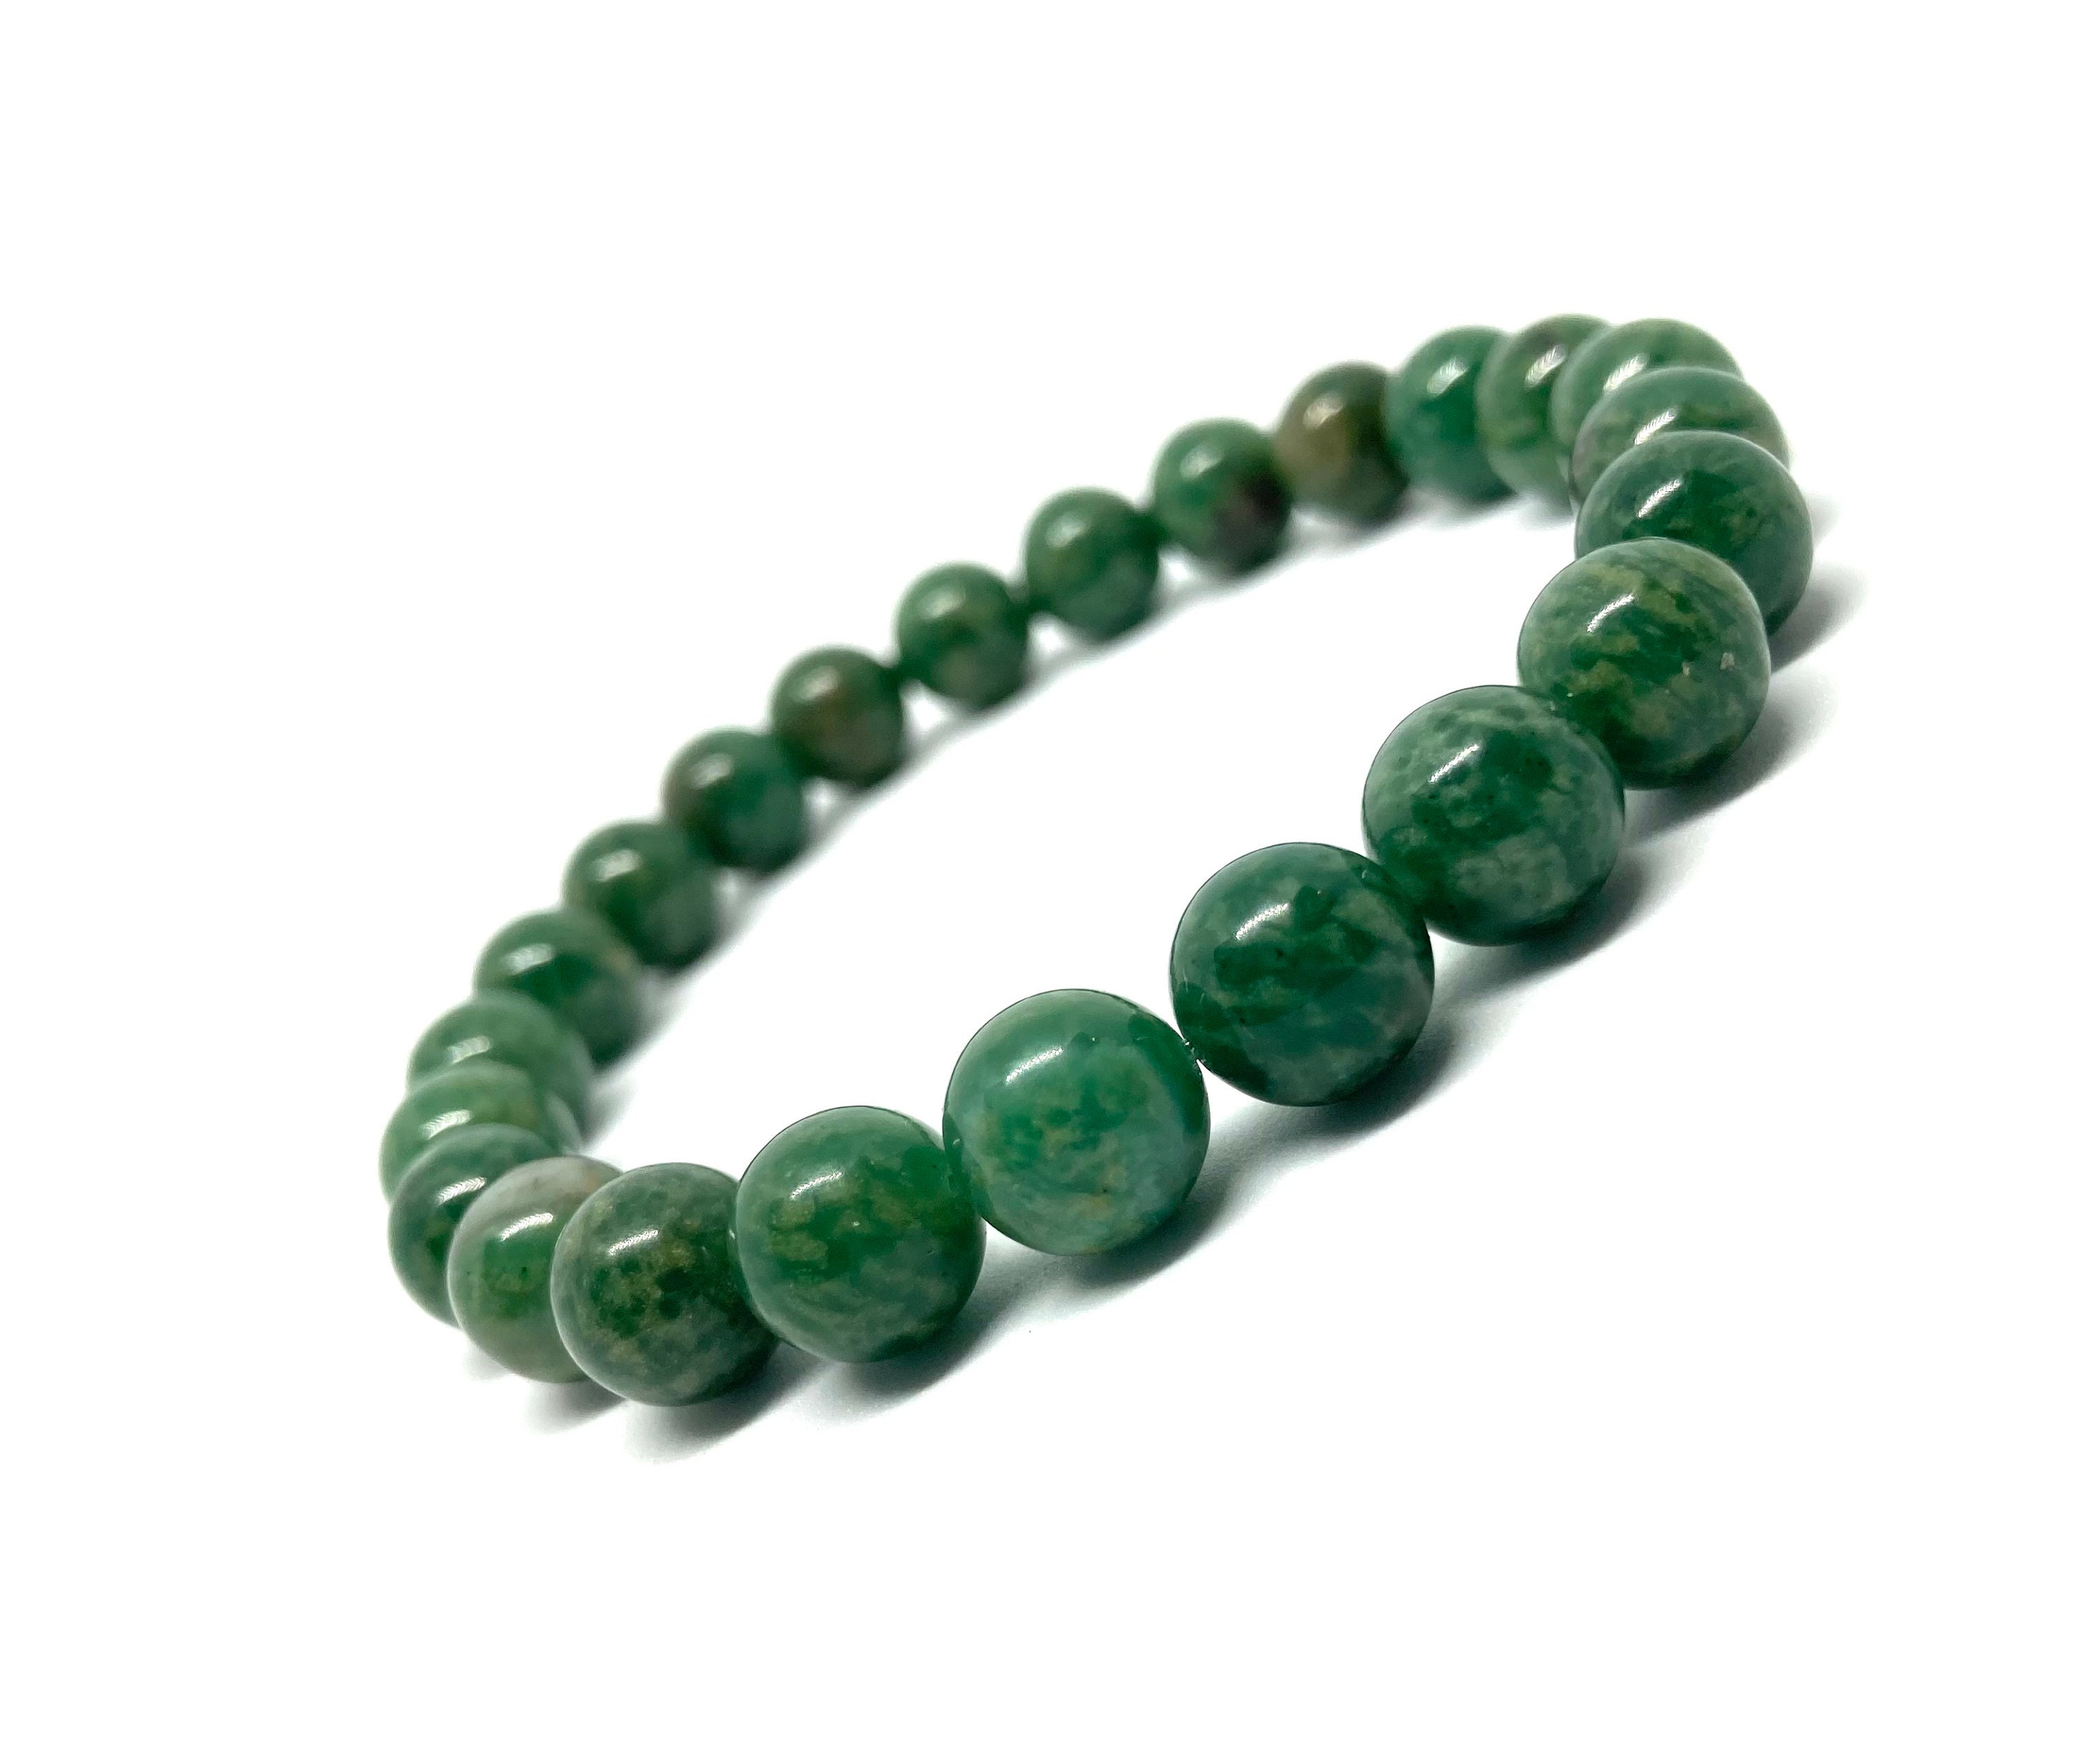 African Green Jade Round Beads Vintage – Estate Beads & Jewelry